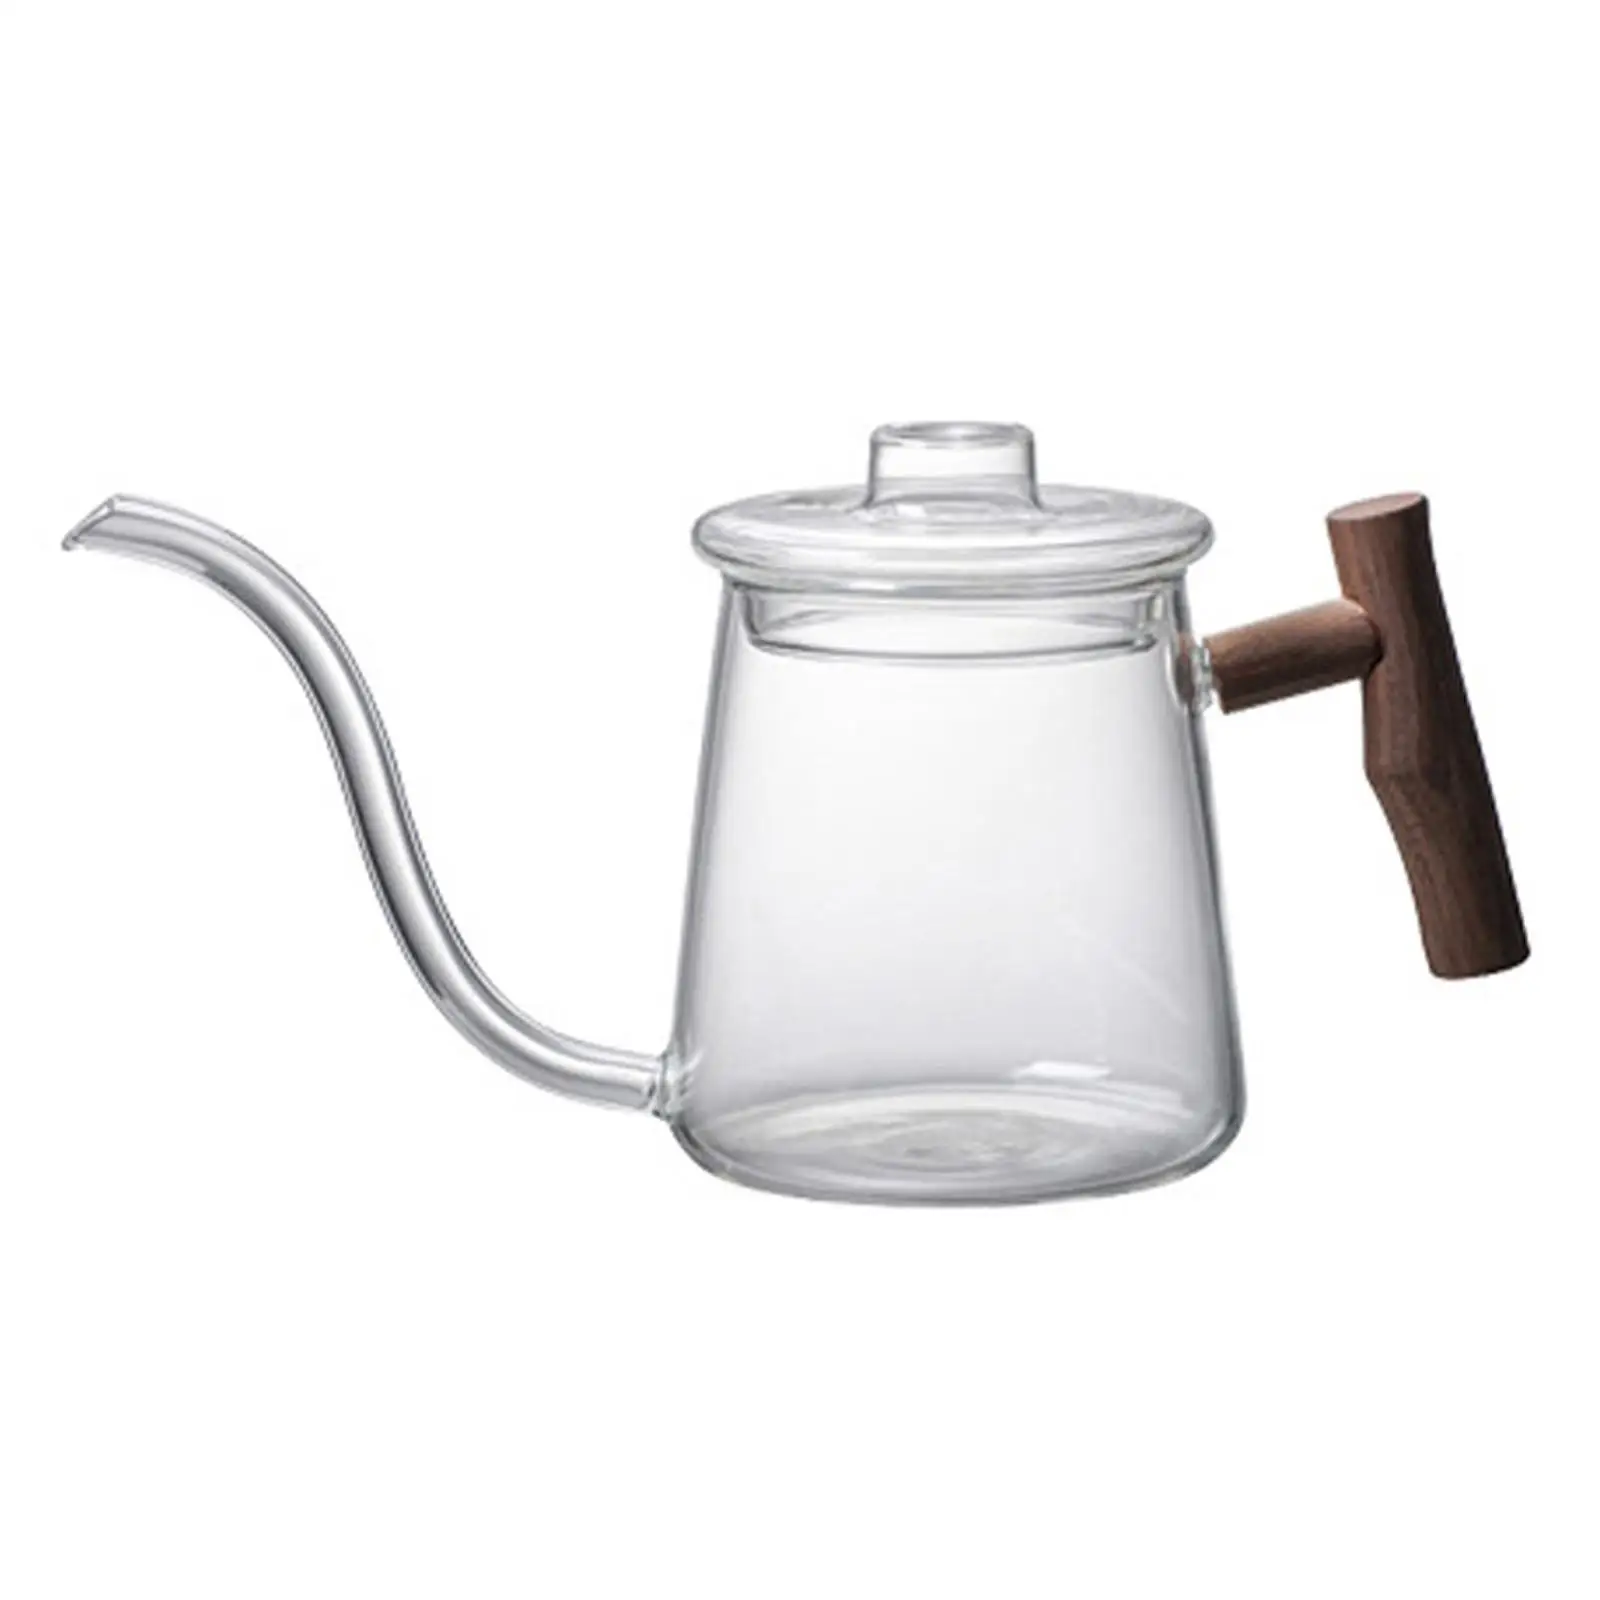 Pour Over Kettle Ergonomic Wooden Handle with Lid Stovetop Gooseneck Kettle for